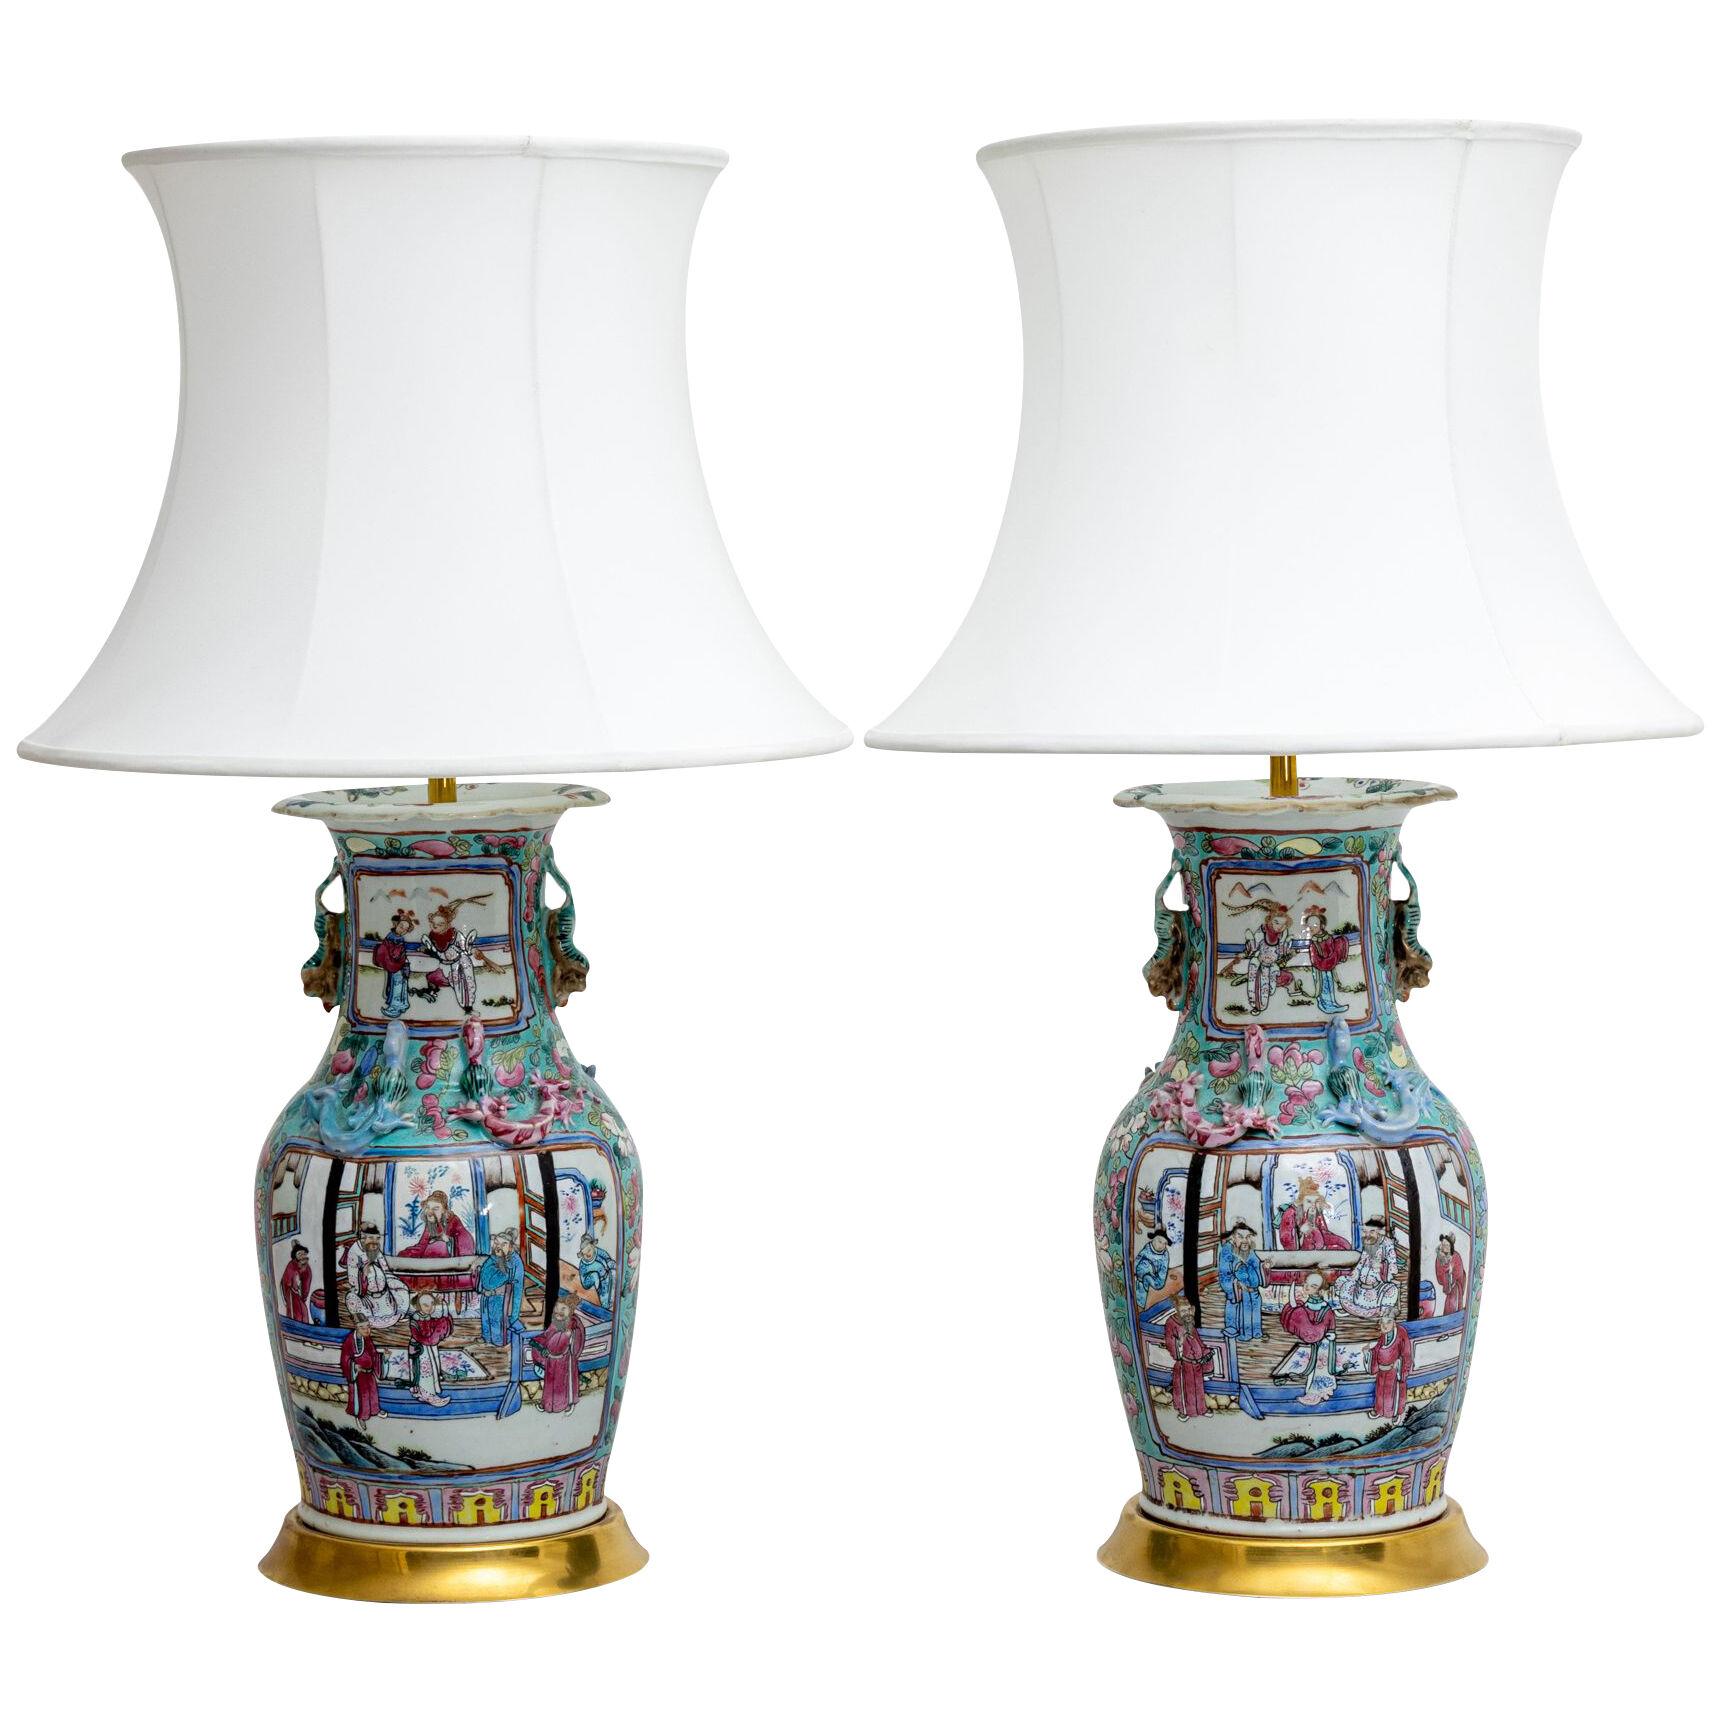 Table lamps with porcelain base, China early 19th century